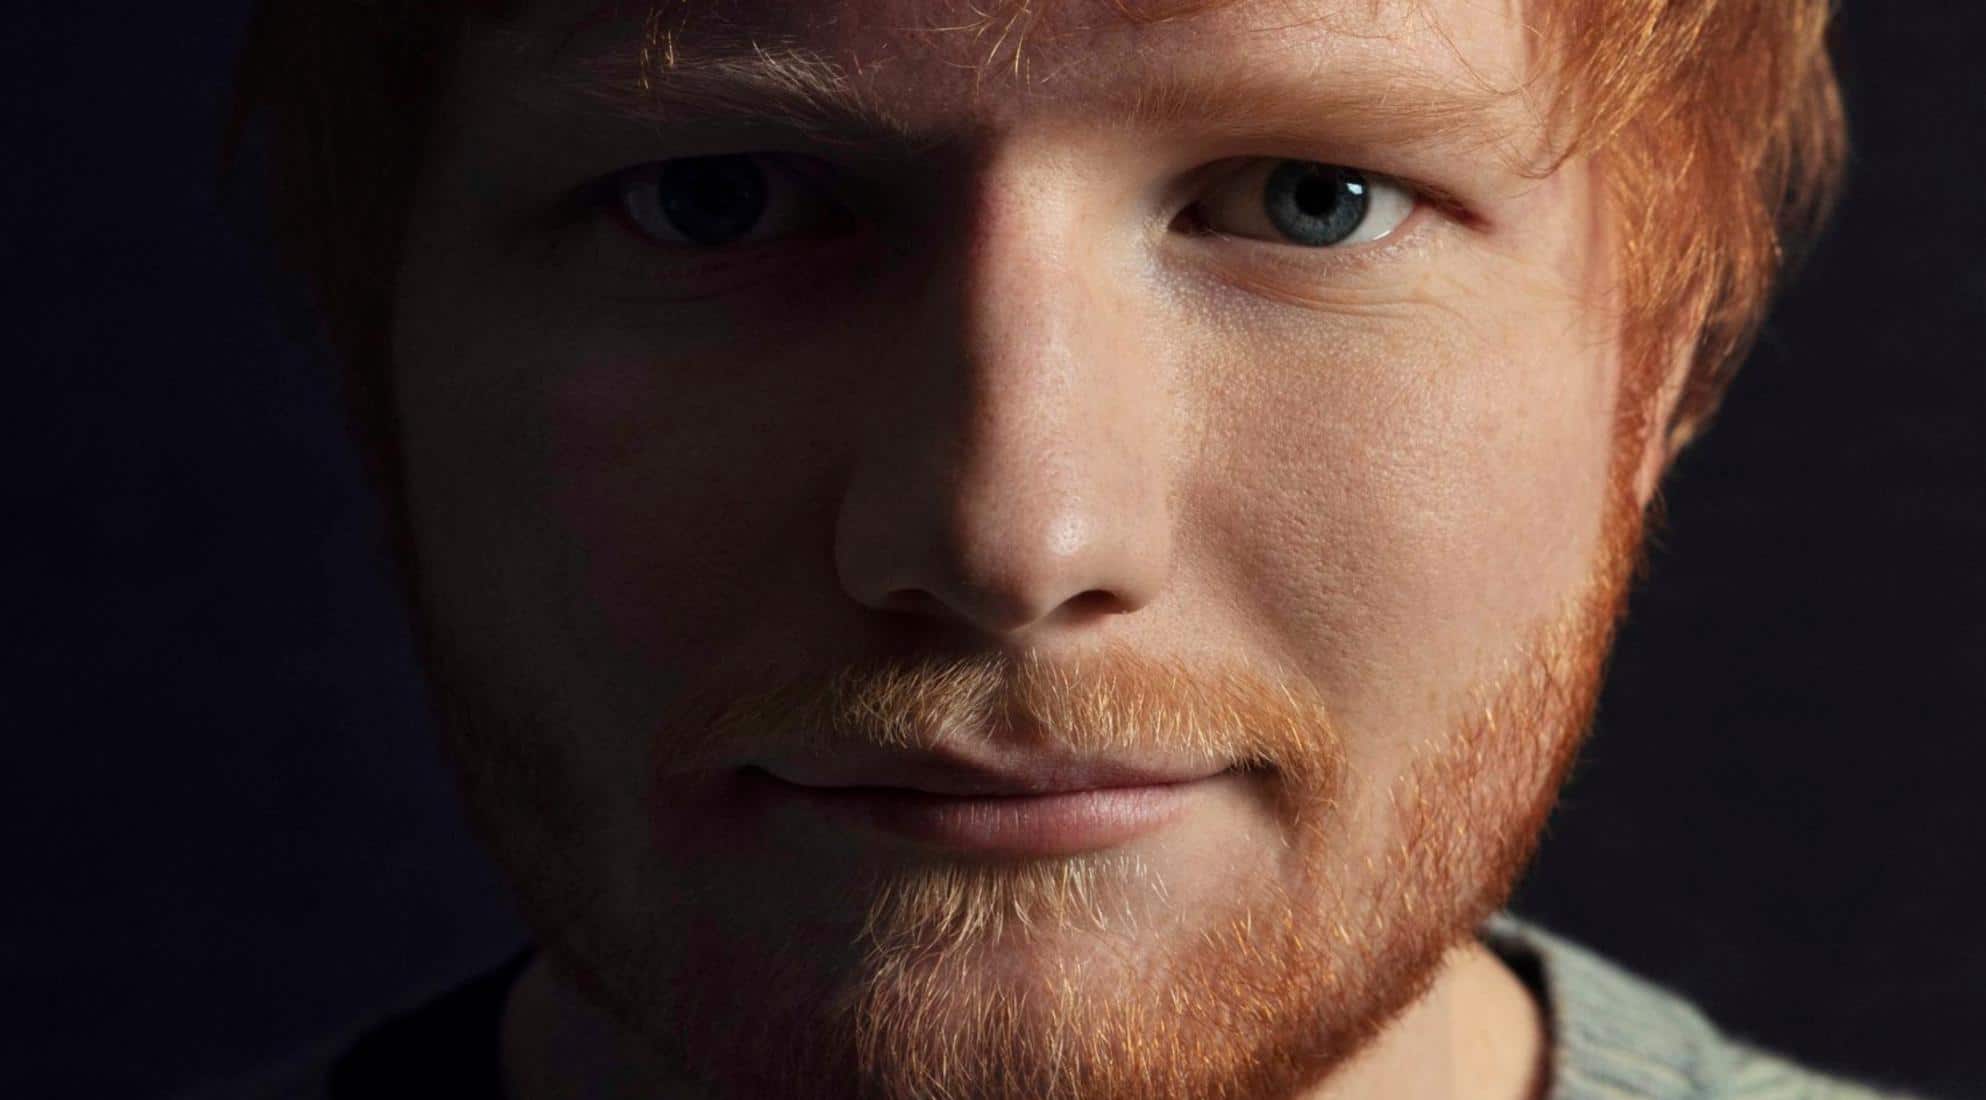 Why do people on Pinterest hate Ed Sheeran?